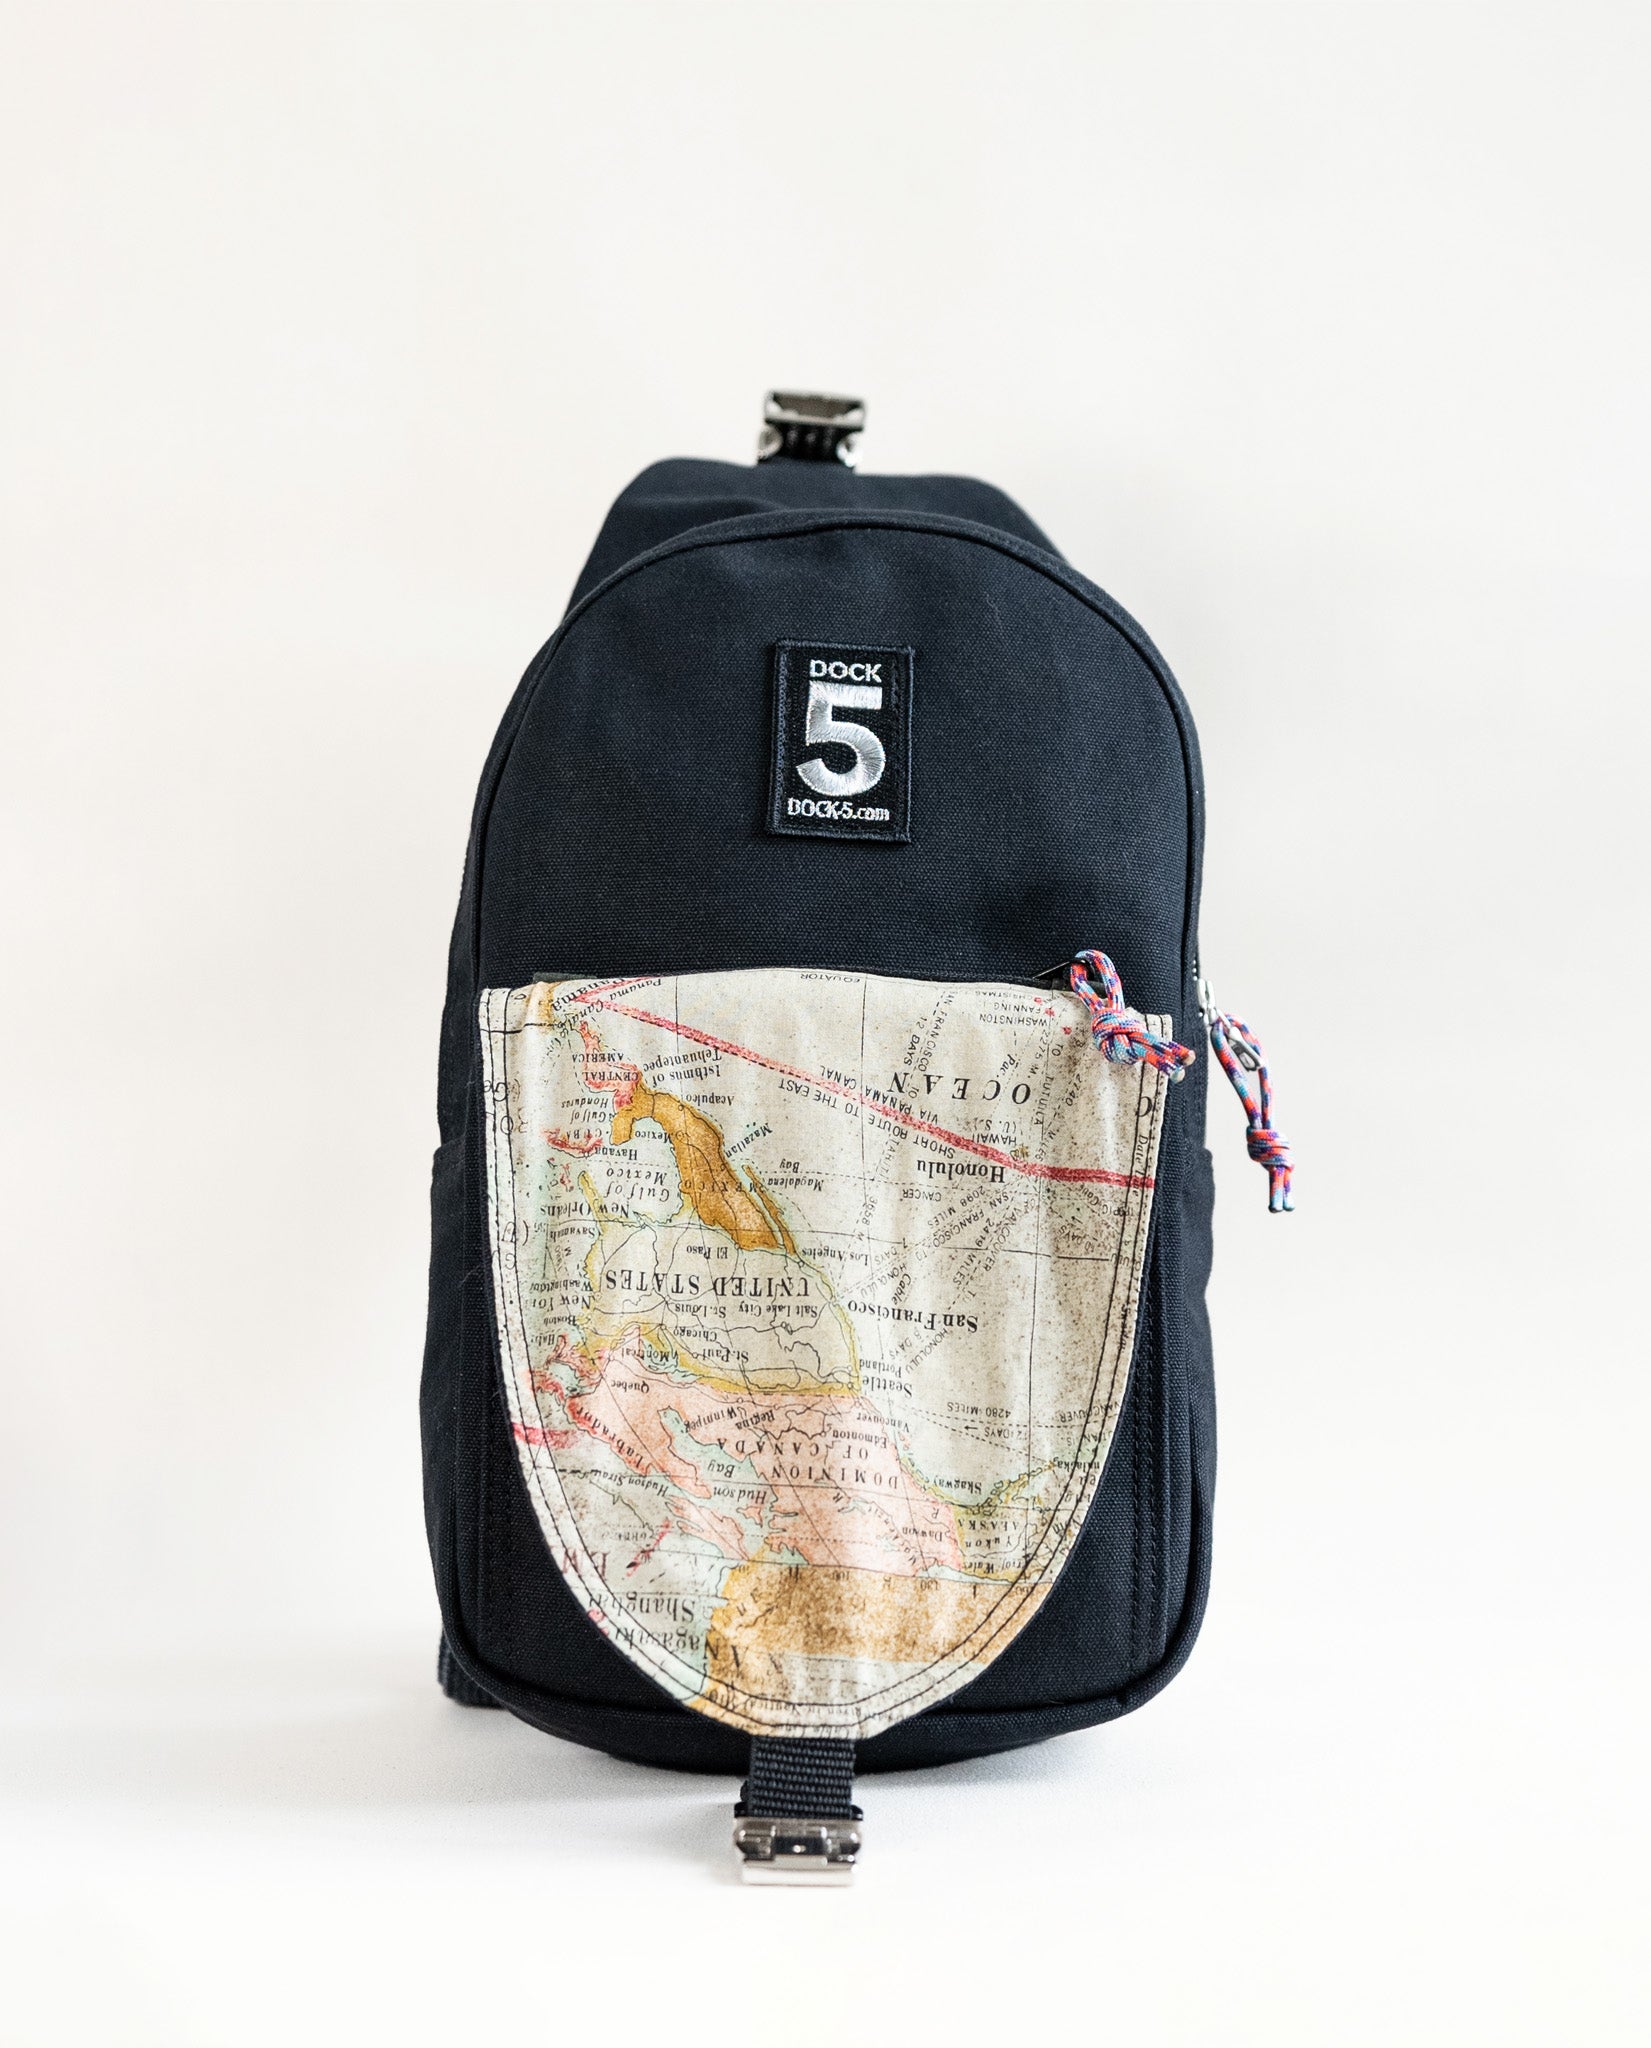 Dock 5’s hand-sewn Viking Dragon Canvas Sling Bag is lined with a vintage ocean map fabric